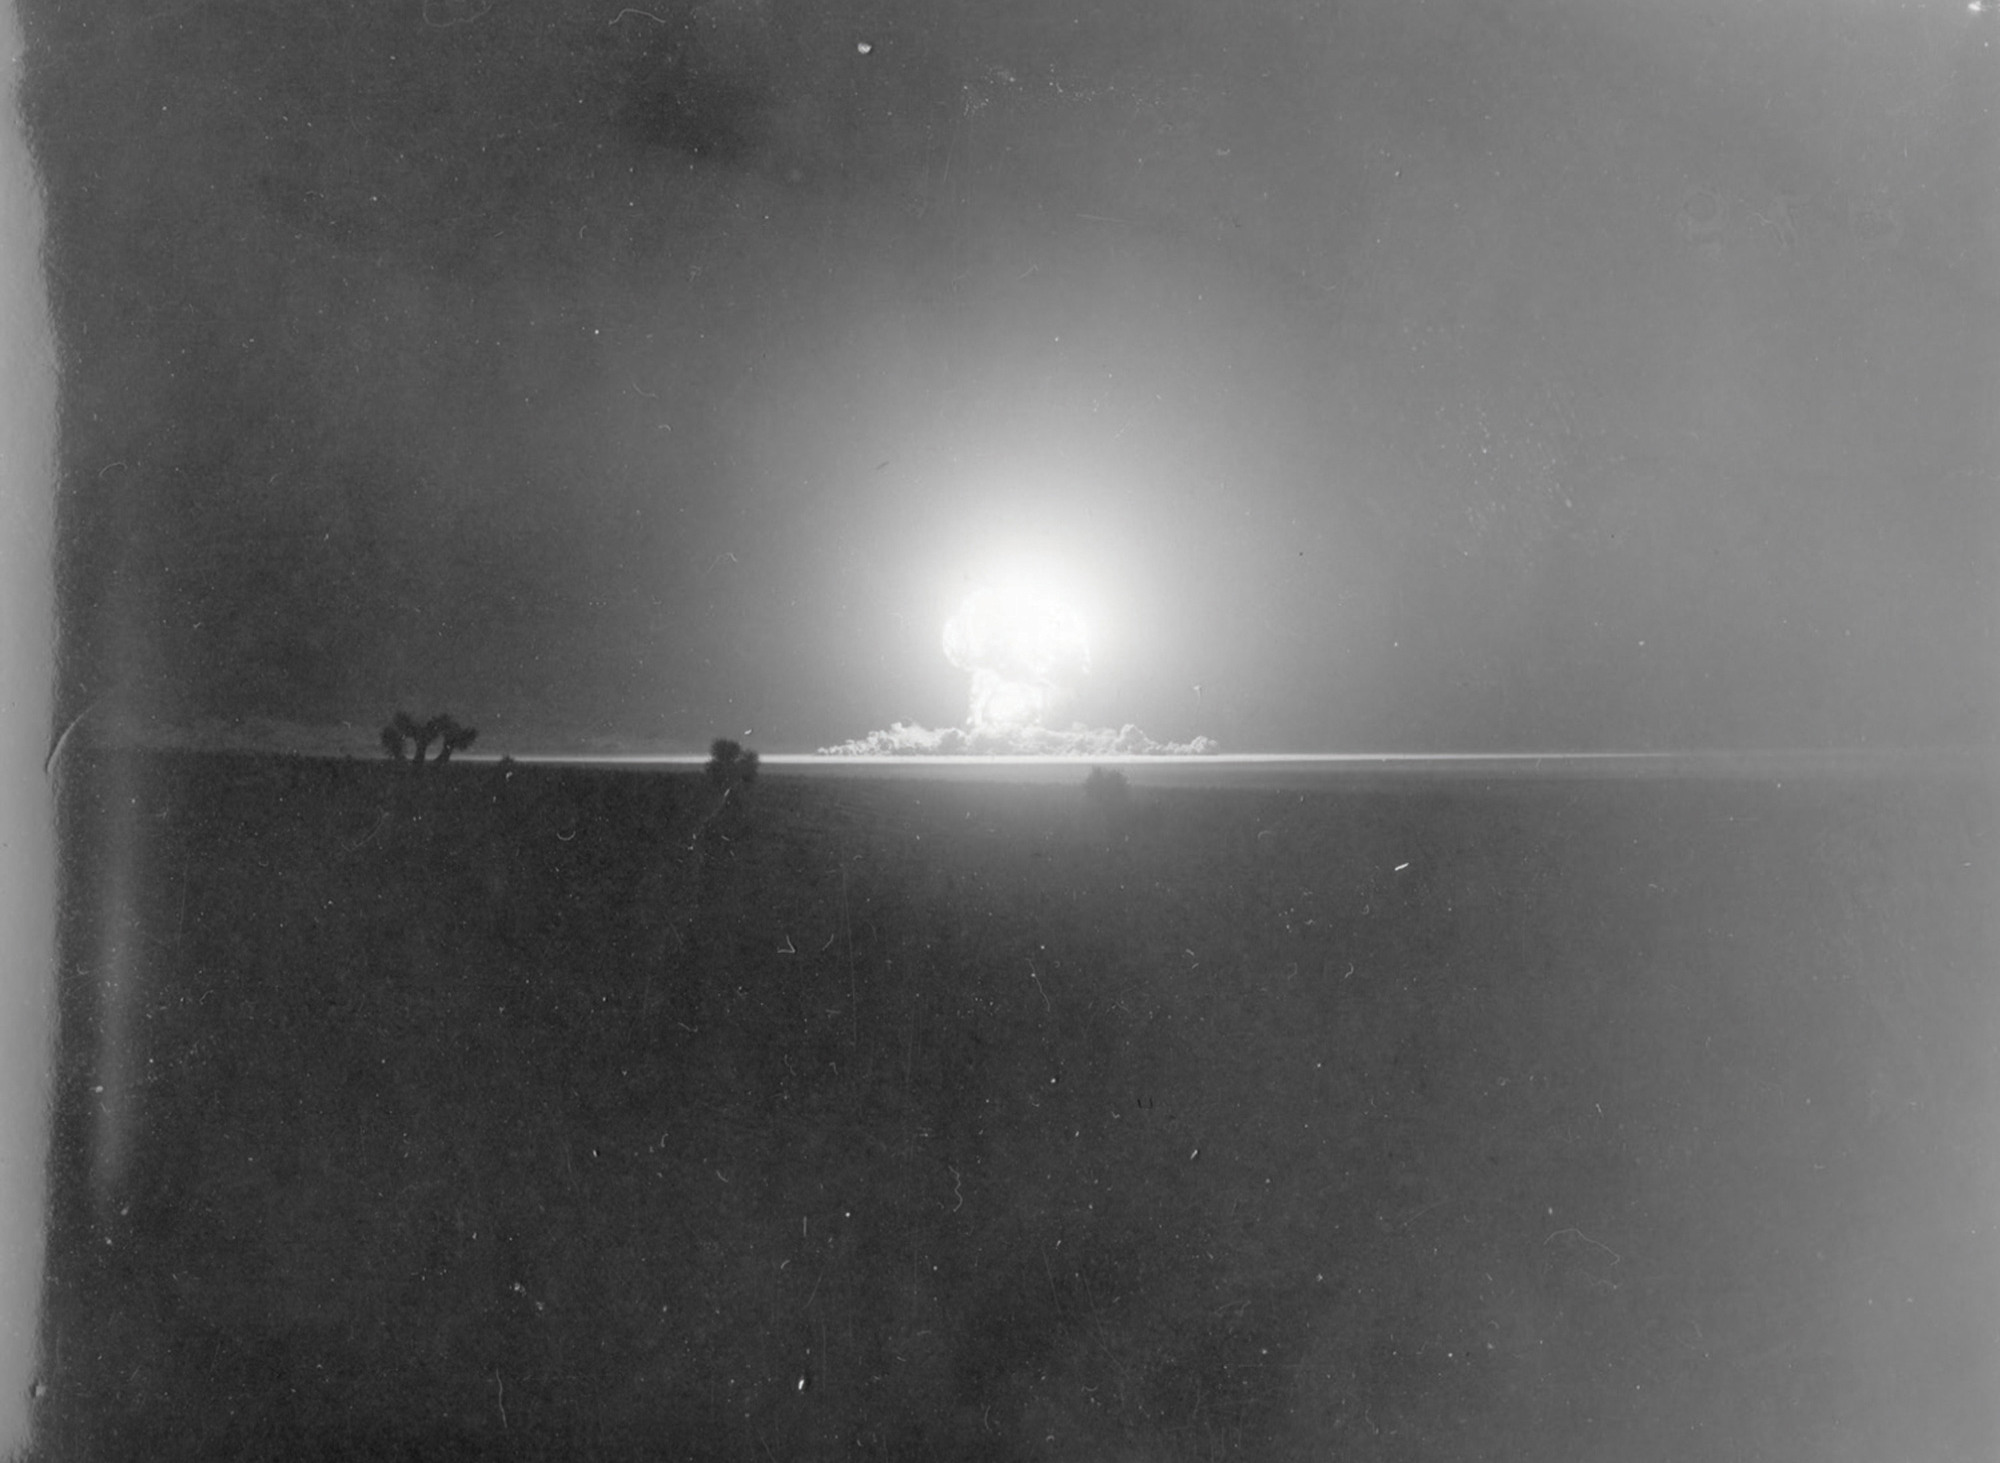 A photograph from Operation Cue depicting the nearby nuclear explosion.